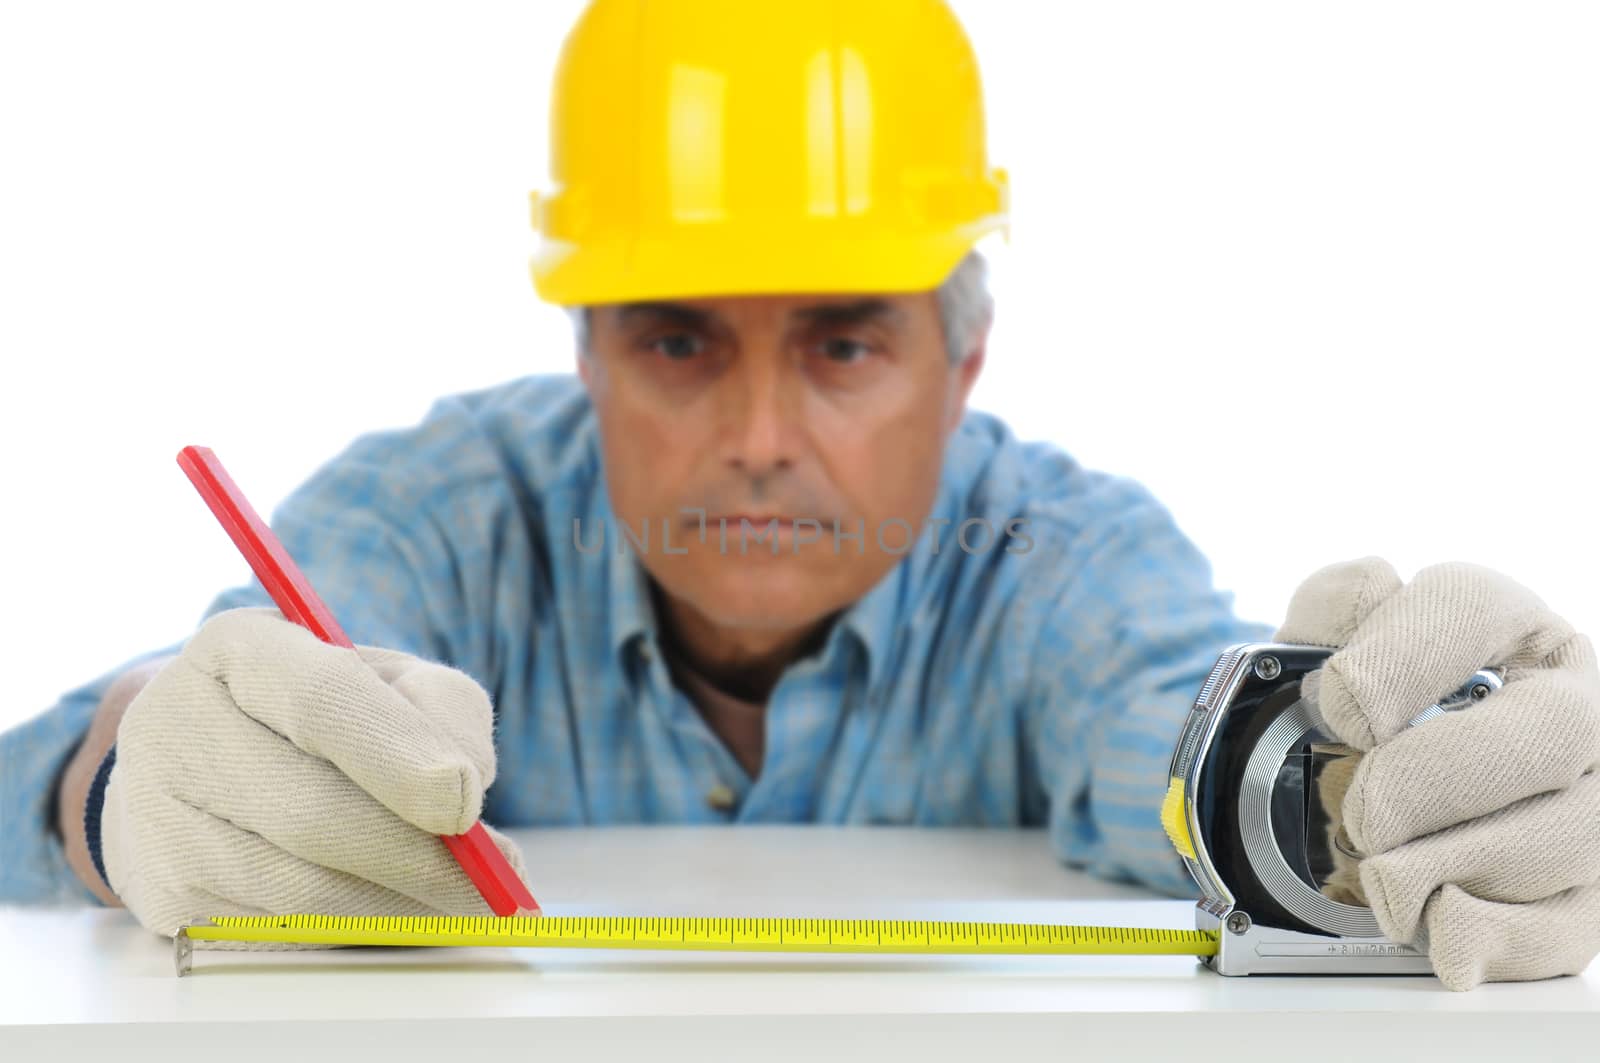 Closeup of a construction worker in hard hat using a measuring tape to mark cut line on a board. Focus is on the mans hands and tape measure.